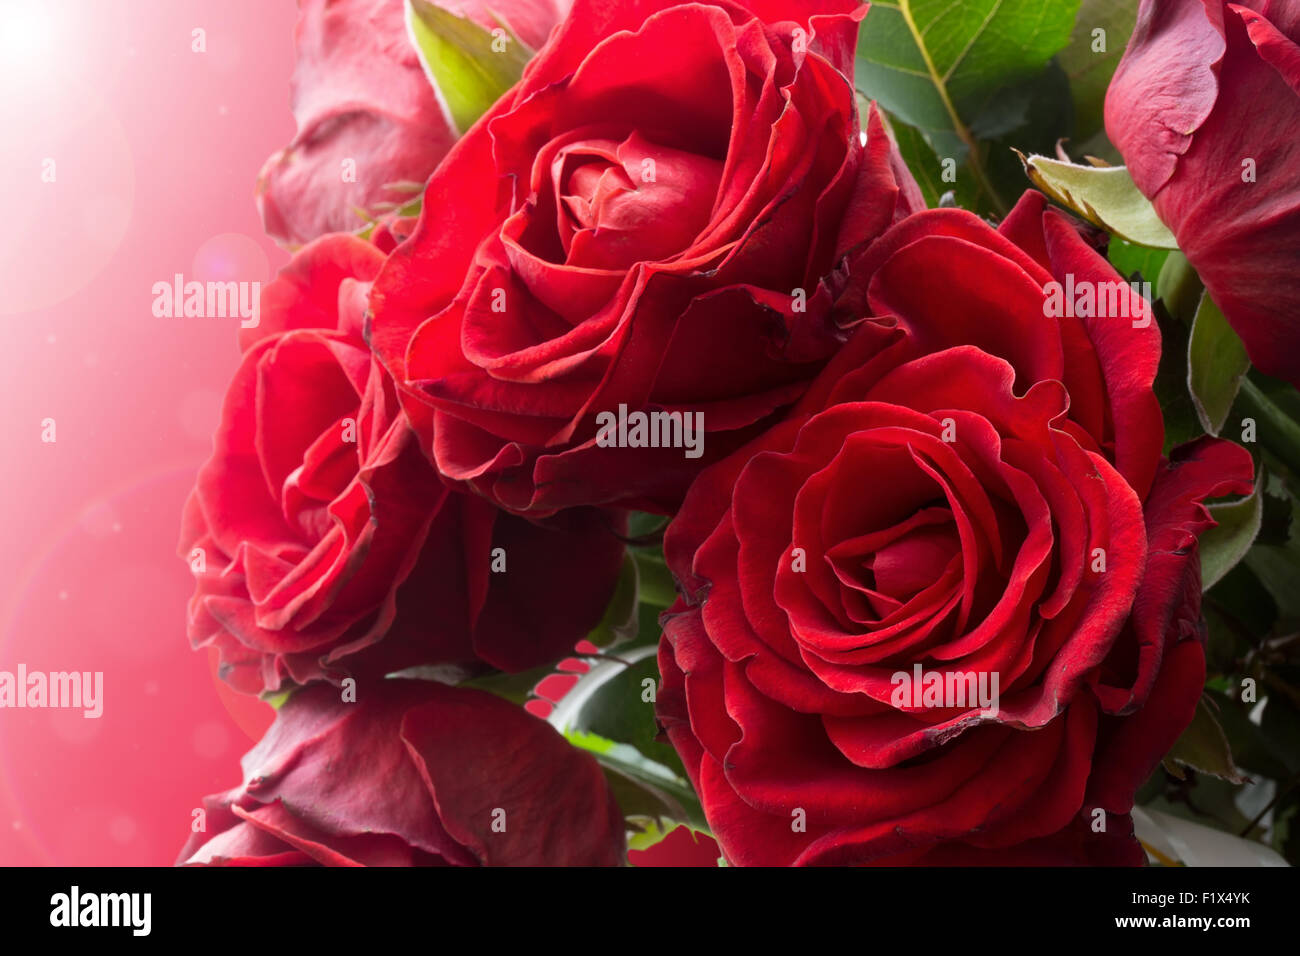 beautiful red roses on a pink background. Stock Photo